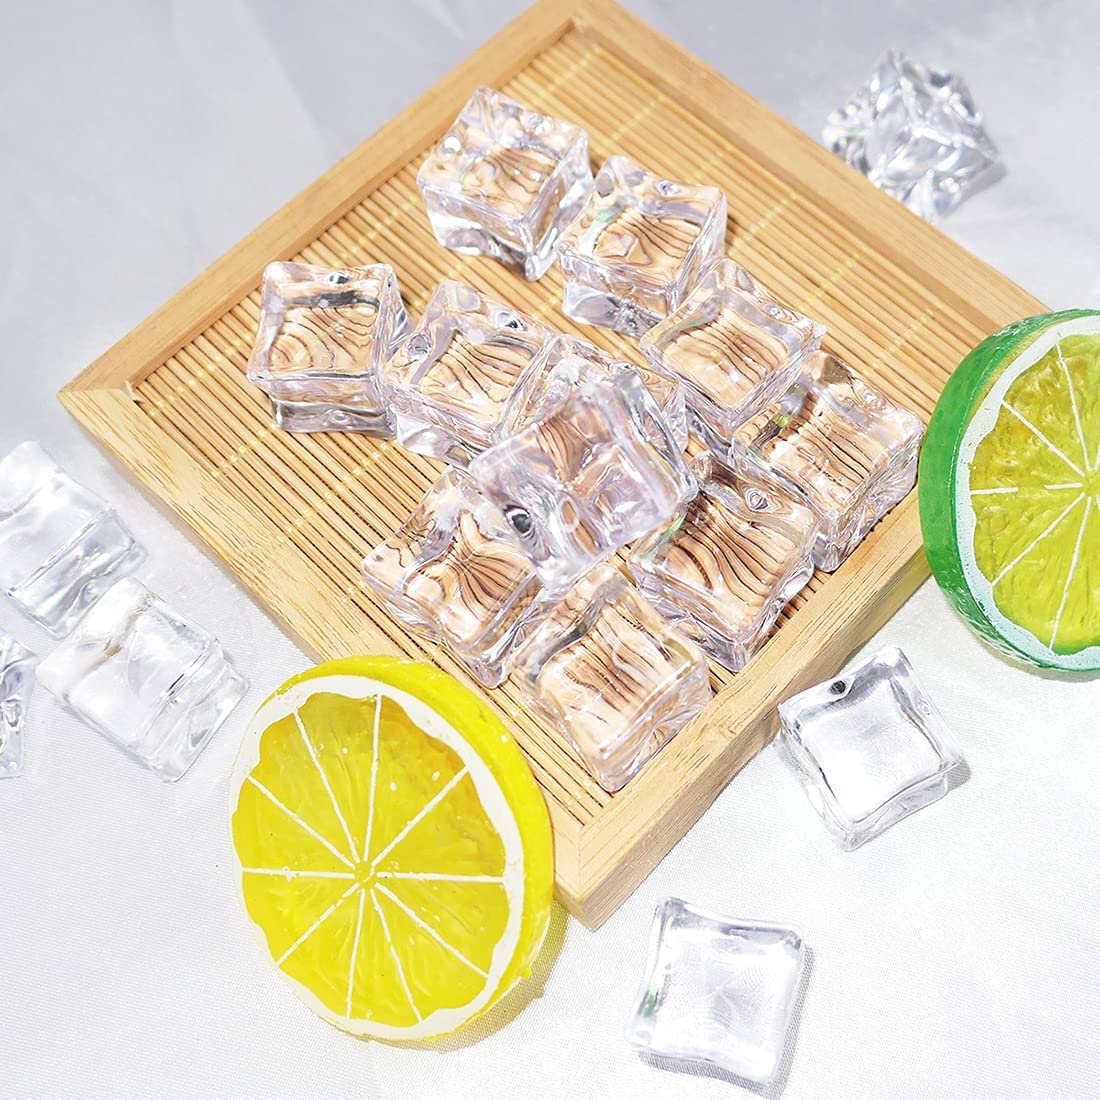 20mm Fake/Artificial Acrylic Ice Cubes | Decorative Props for Product Photography(50pcs) photography props- #Royalkart#colour props